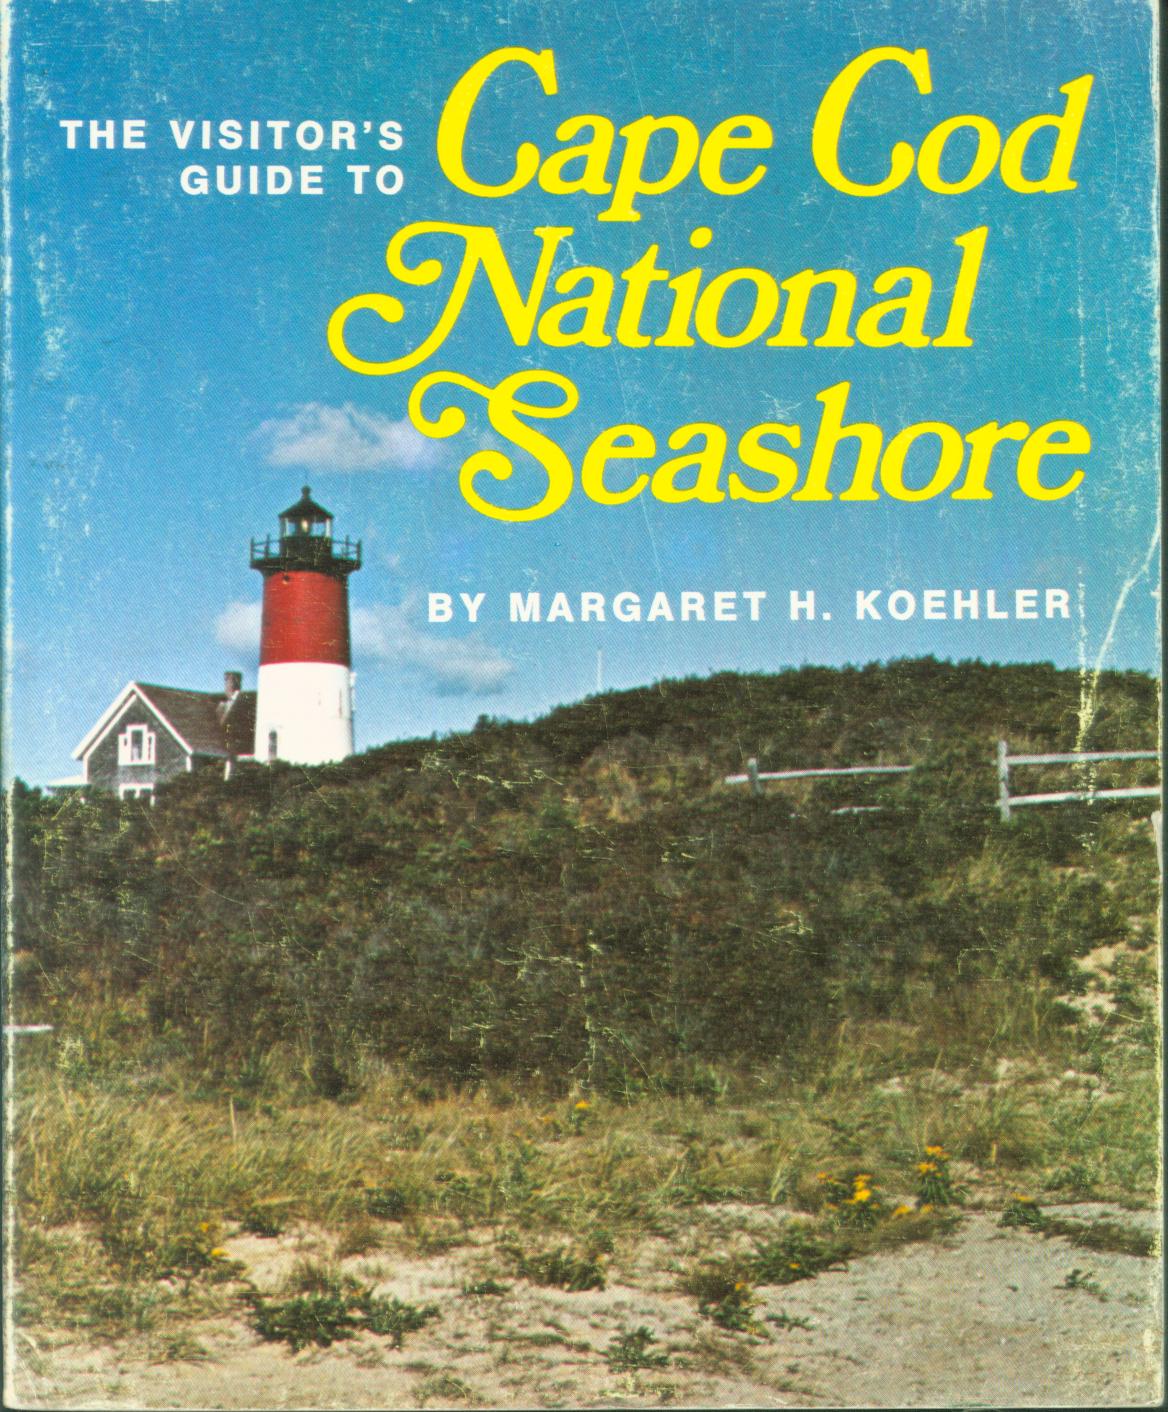 THE VISITOR'S GUIDE TO CAPE COD NATIONAL SEASHORE.